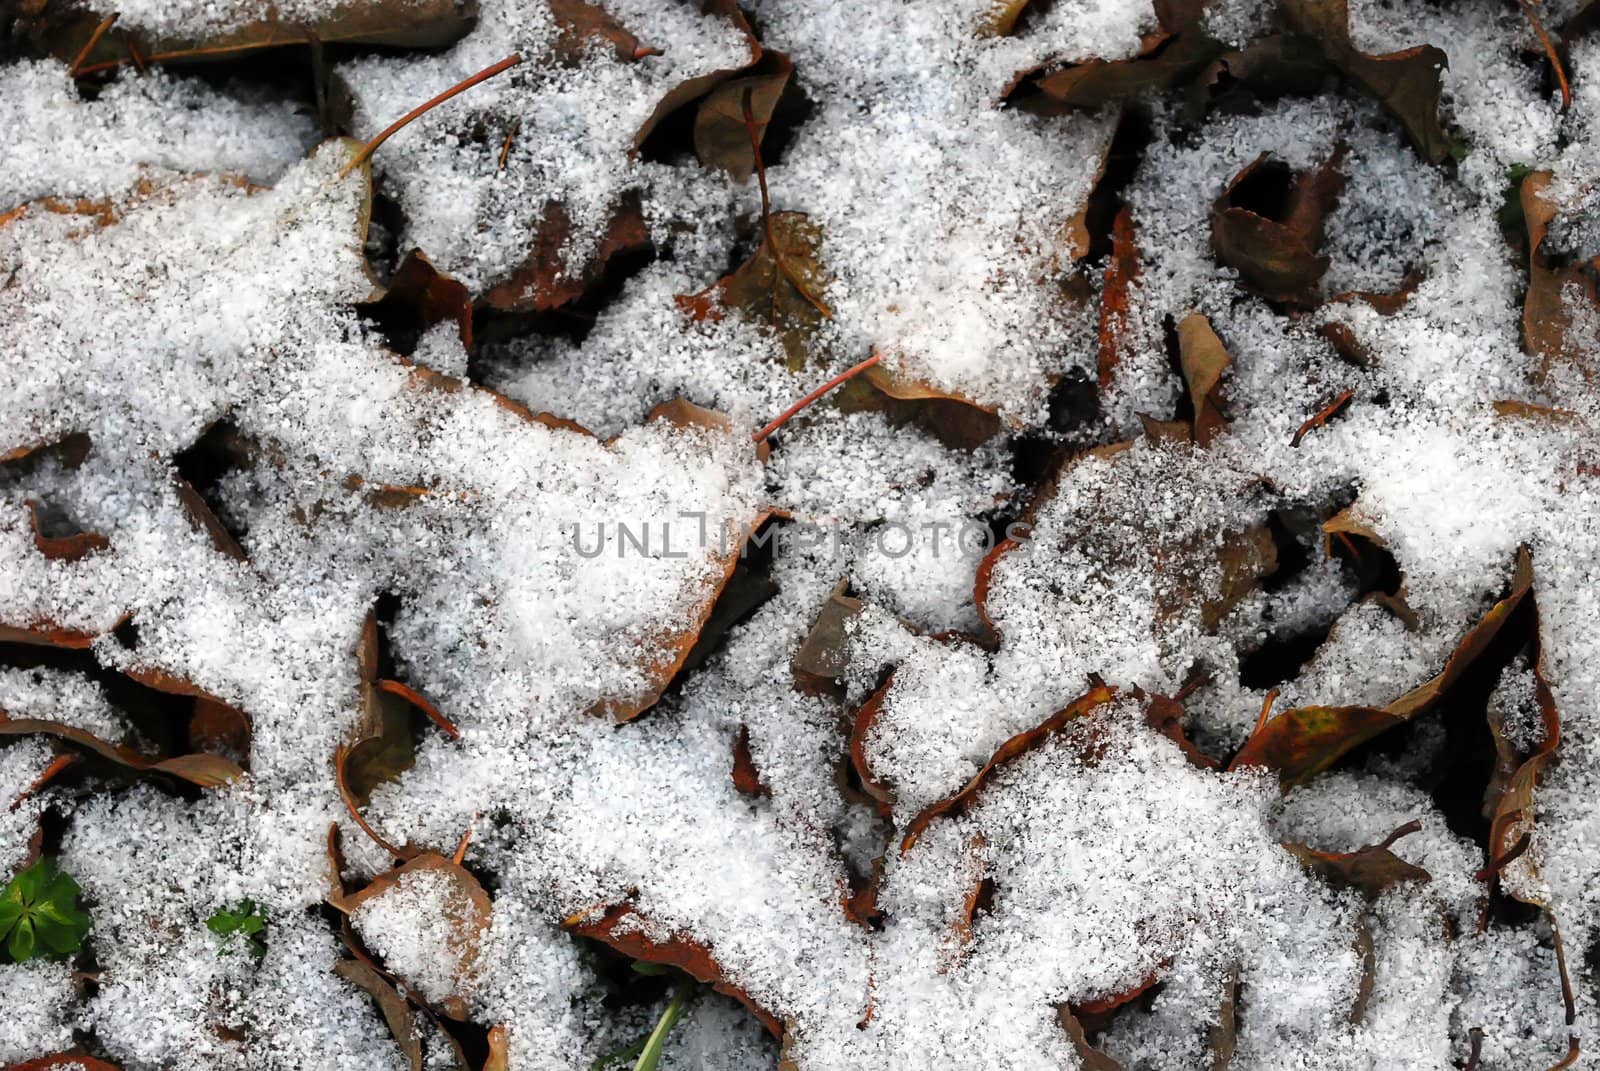 Fallen Leaves with Snow by Ale059